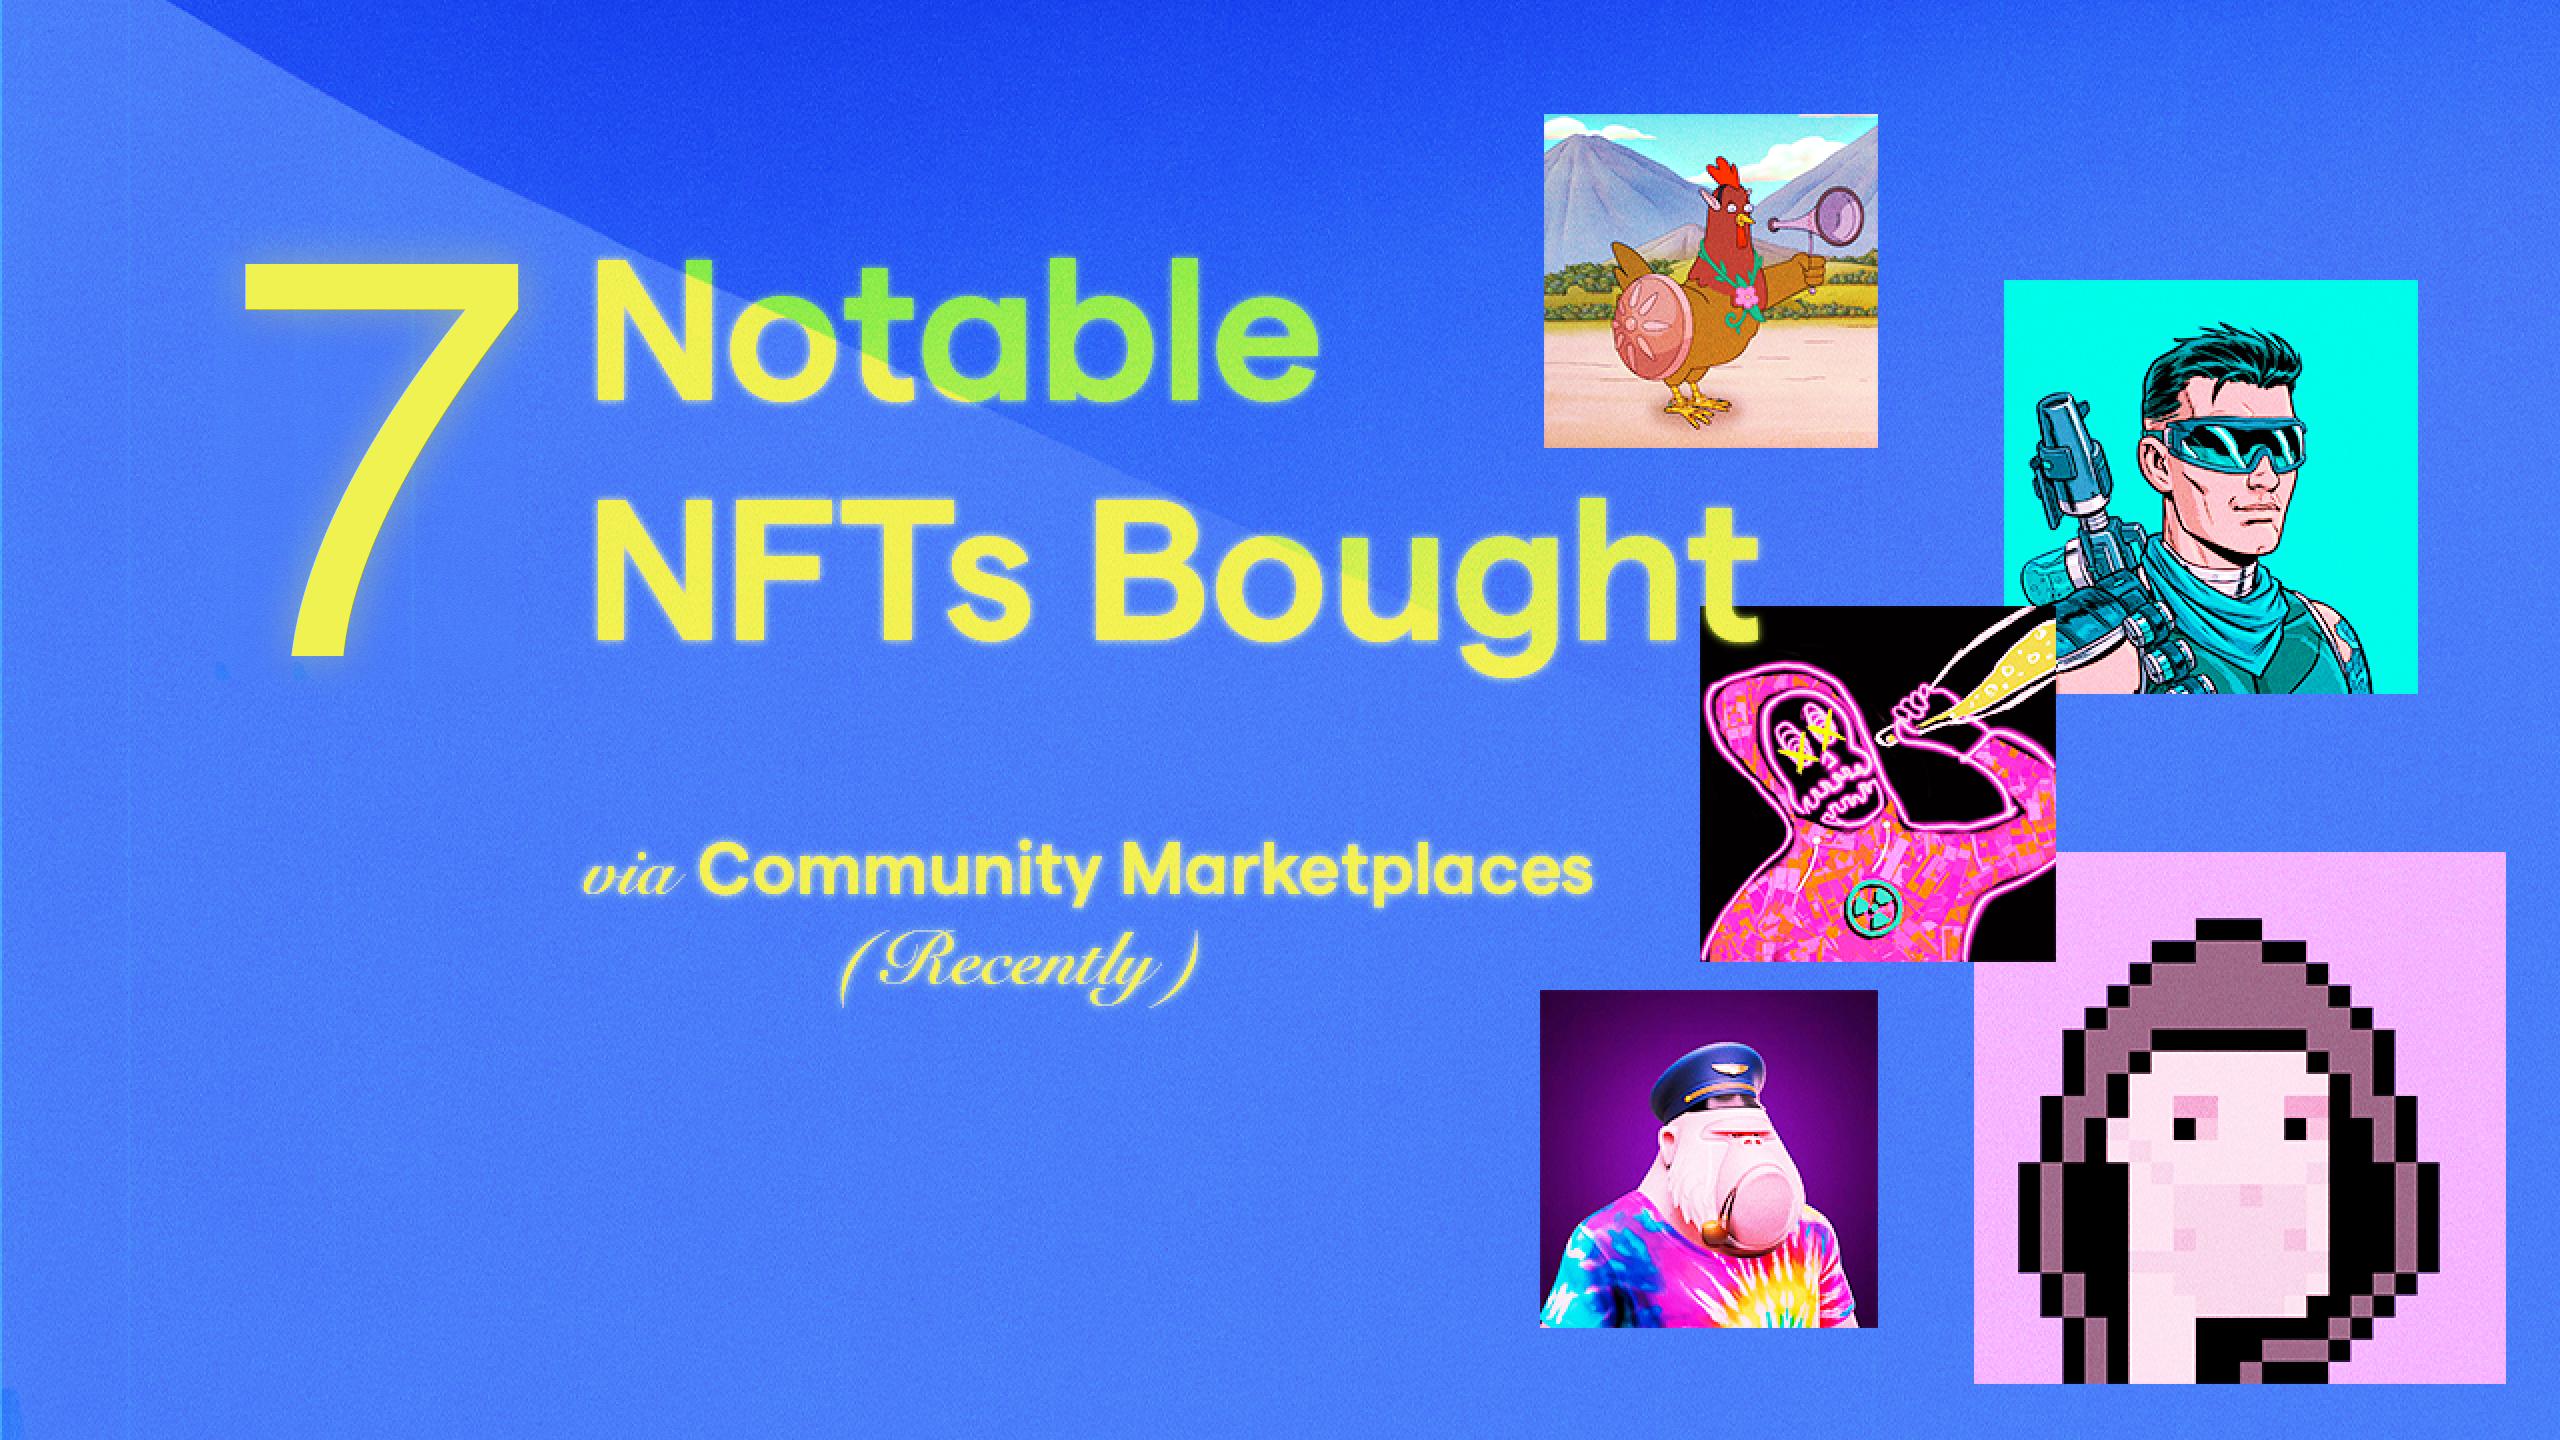 These 7 Recent NFT Sales Show How Cool and Diverse Community Marketplaces Are